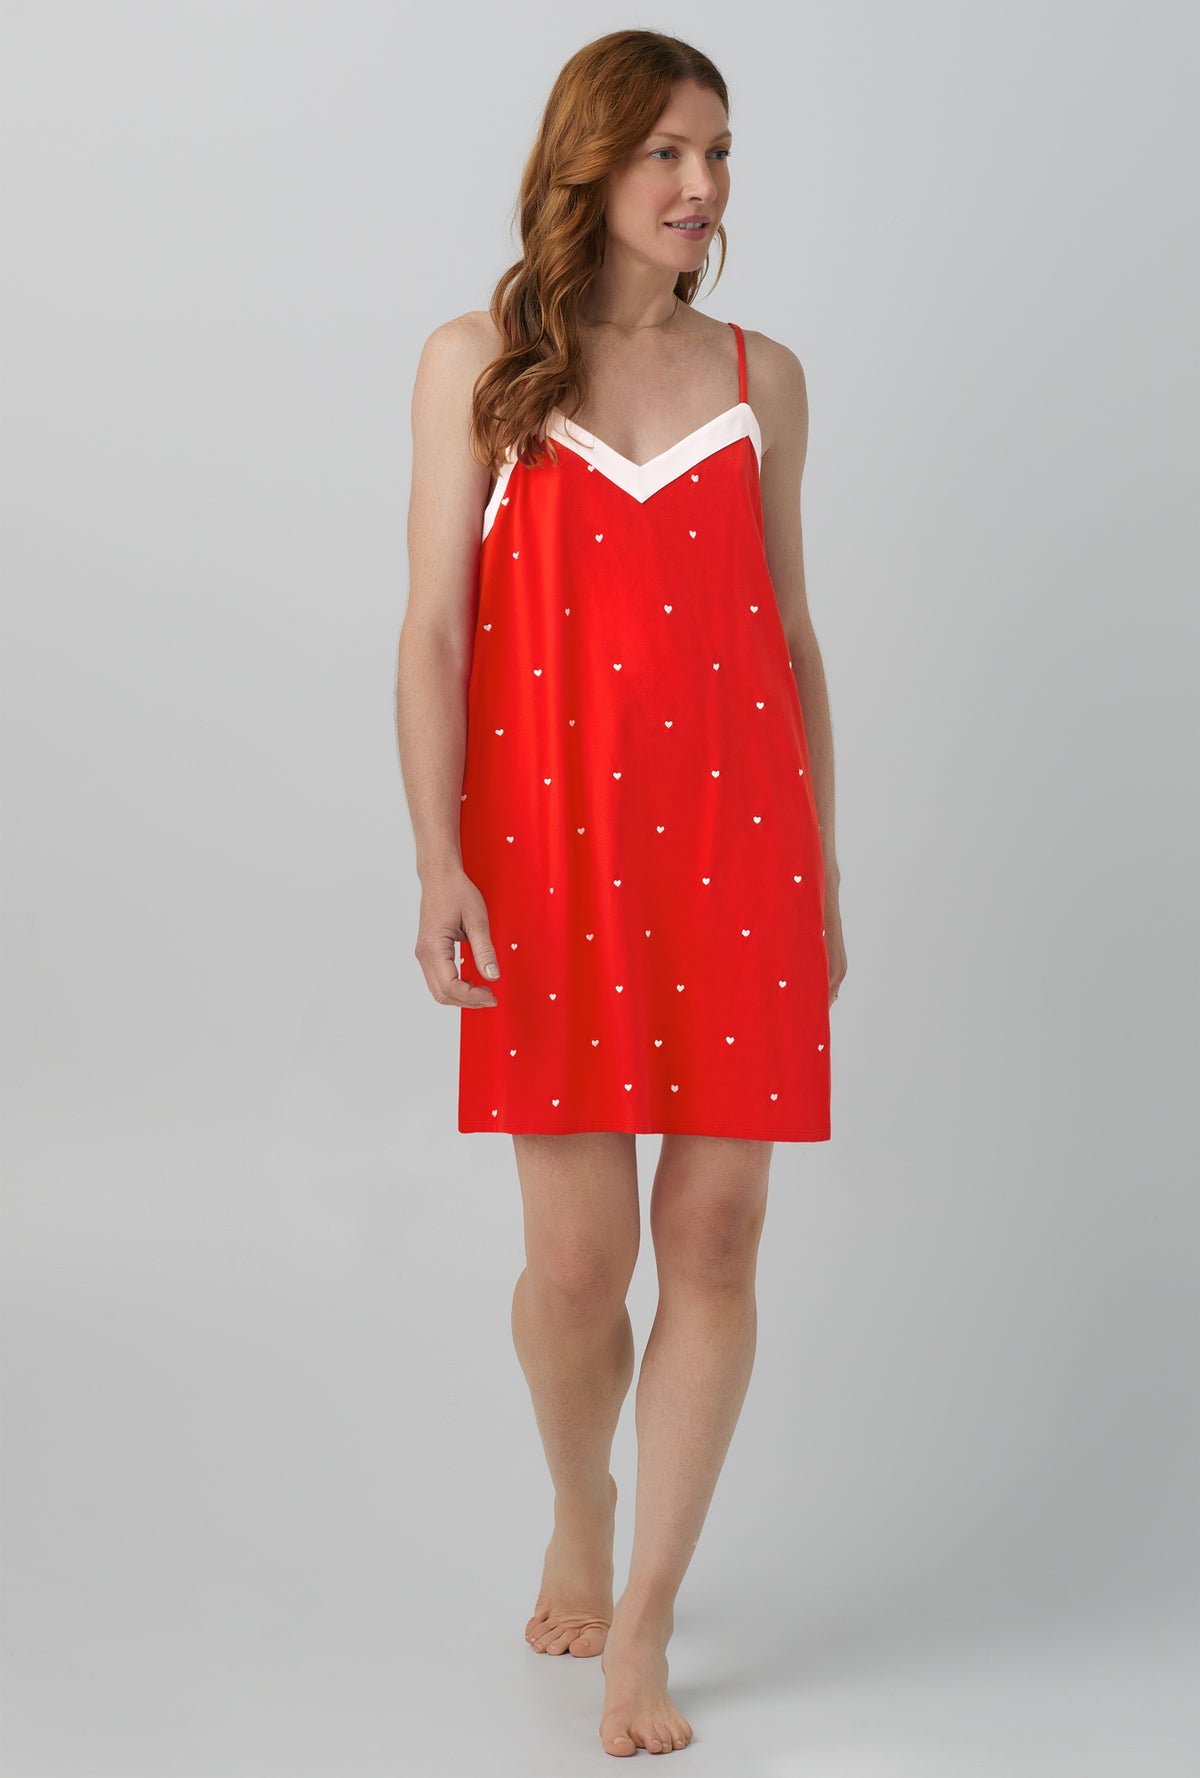 A lady wearing red chemise with tiny hearts print